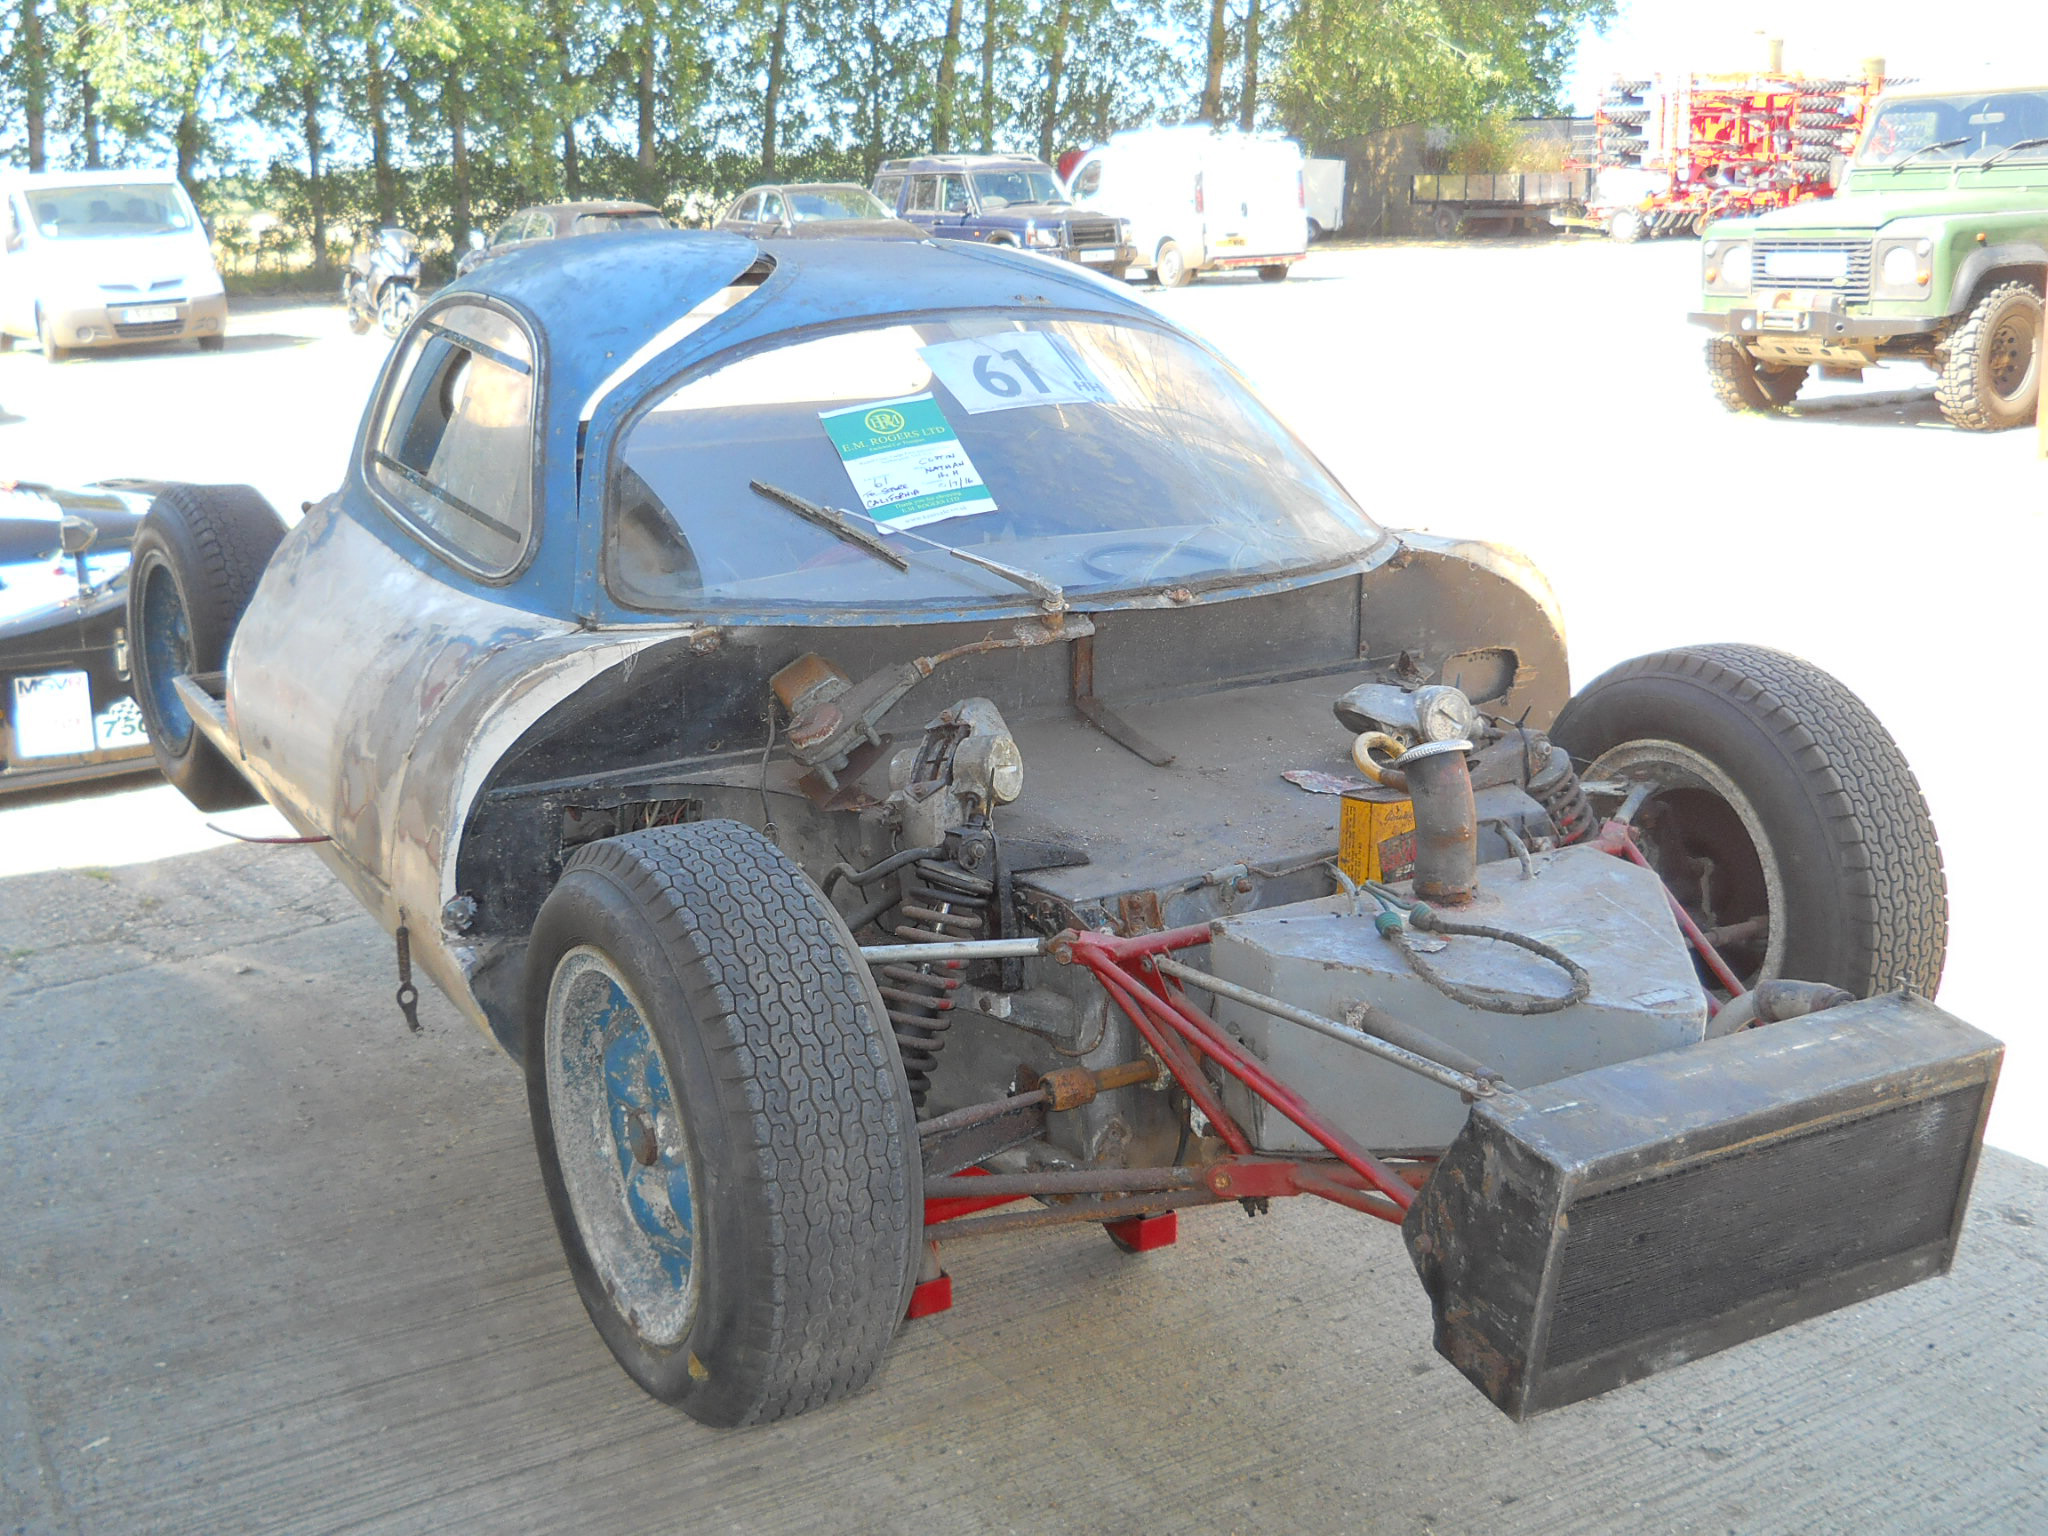 Autojumble, Restored Costin-Nathan prototype racer to be unveiled at Autojumble, ClassicCars.com Journal